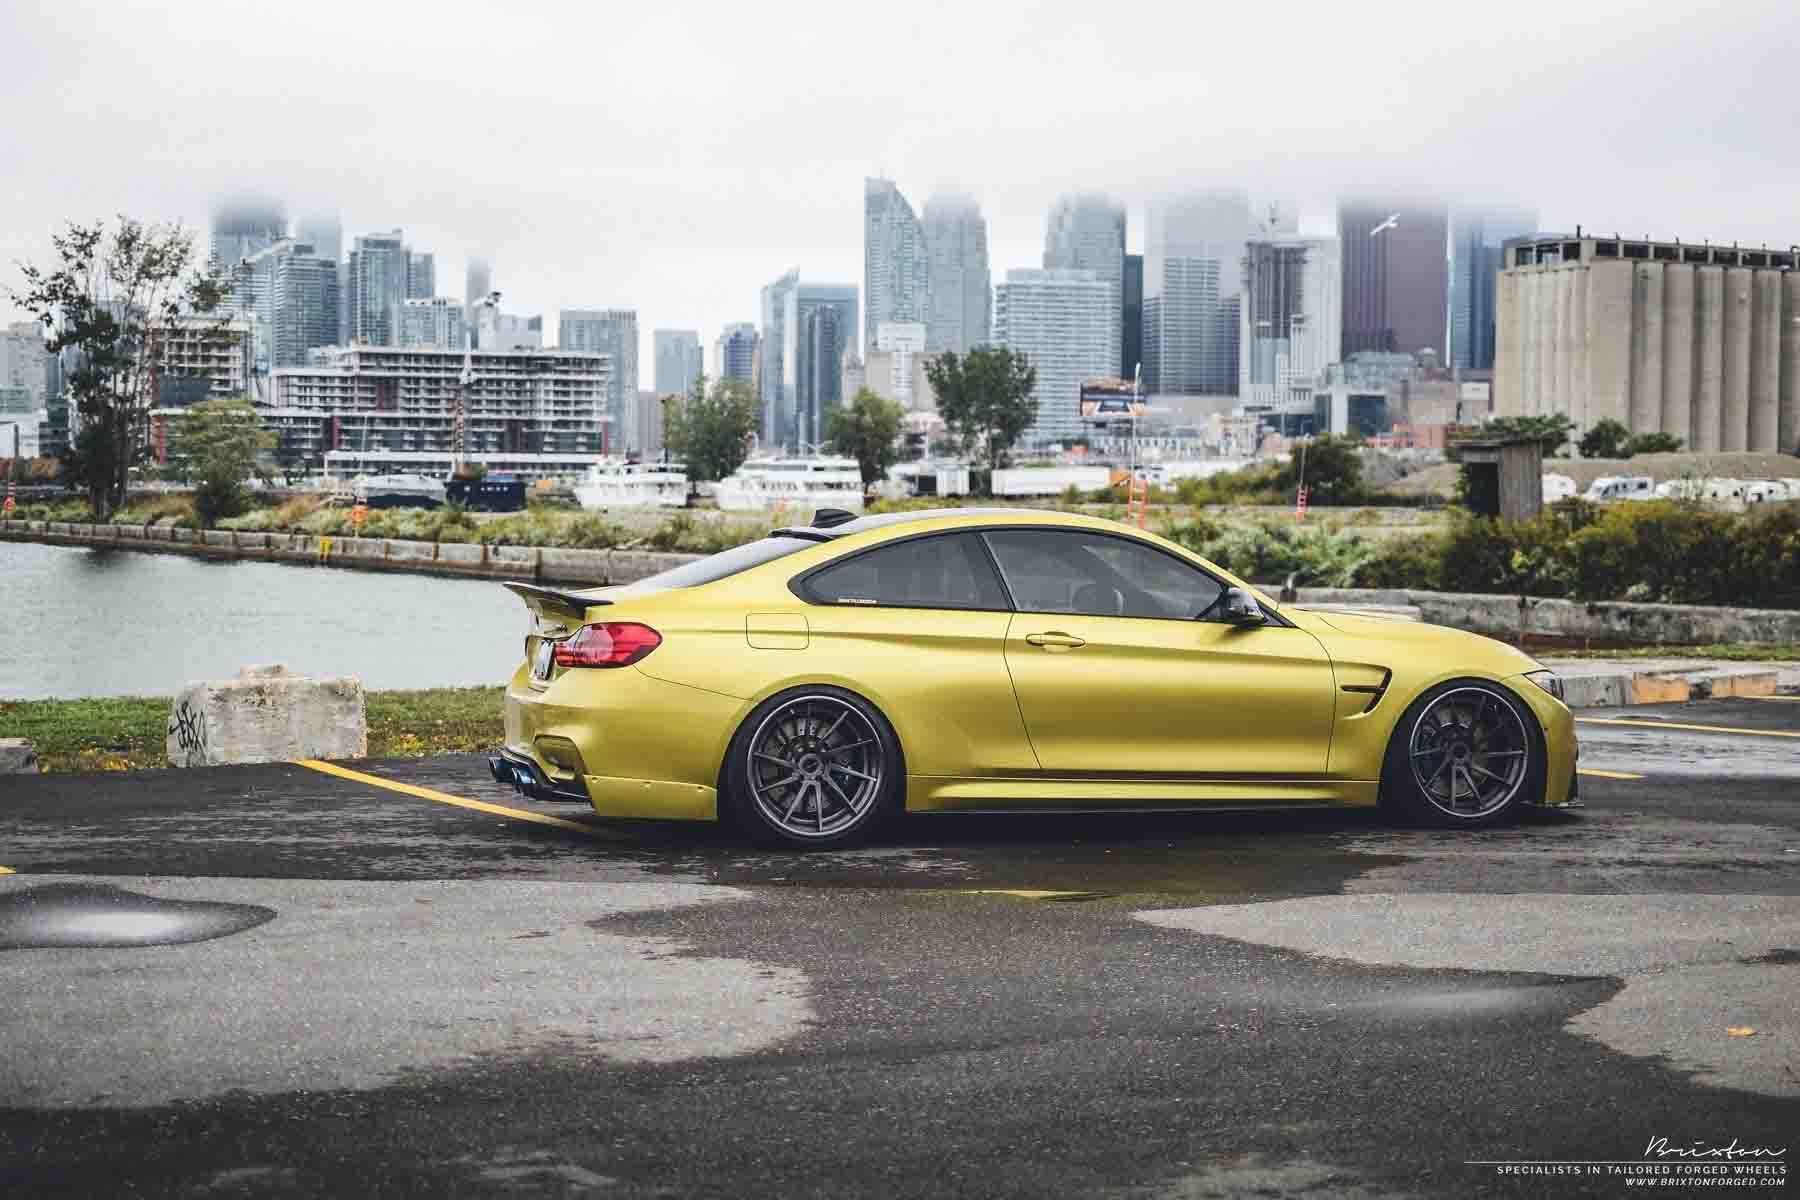 images-products-1-2787-232975075-brixton-forged-austin-yellow-bmw-m4-f82-brixton-forged-r10d-targa-series-3-piece-concave-forged-.jpg